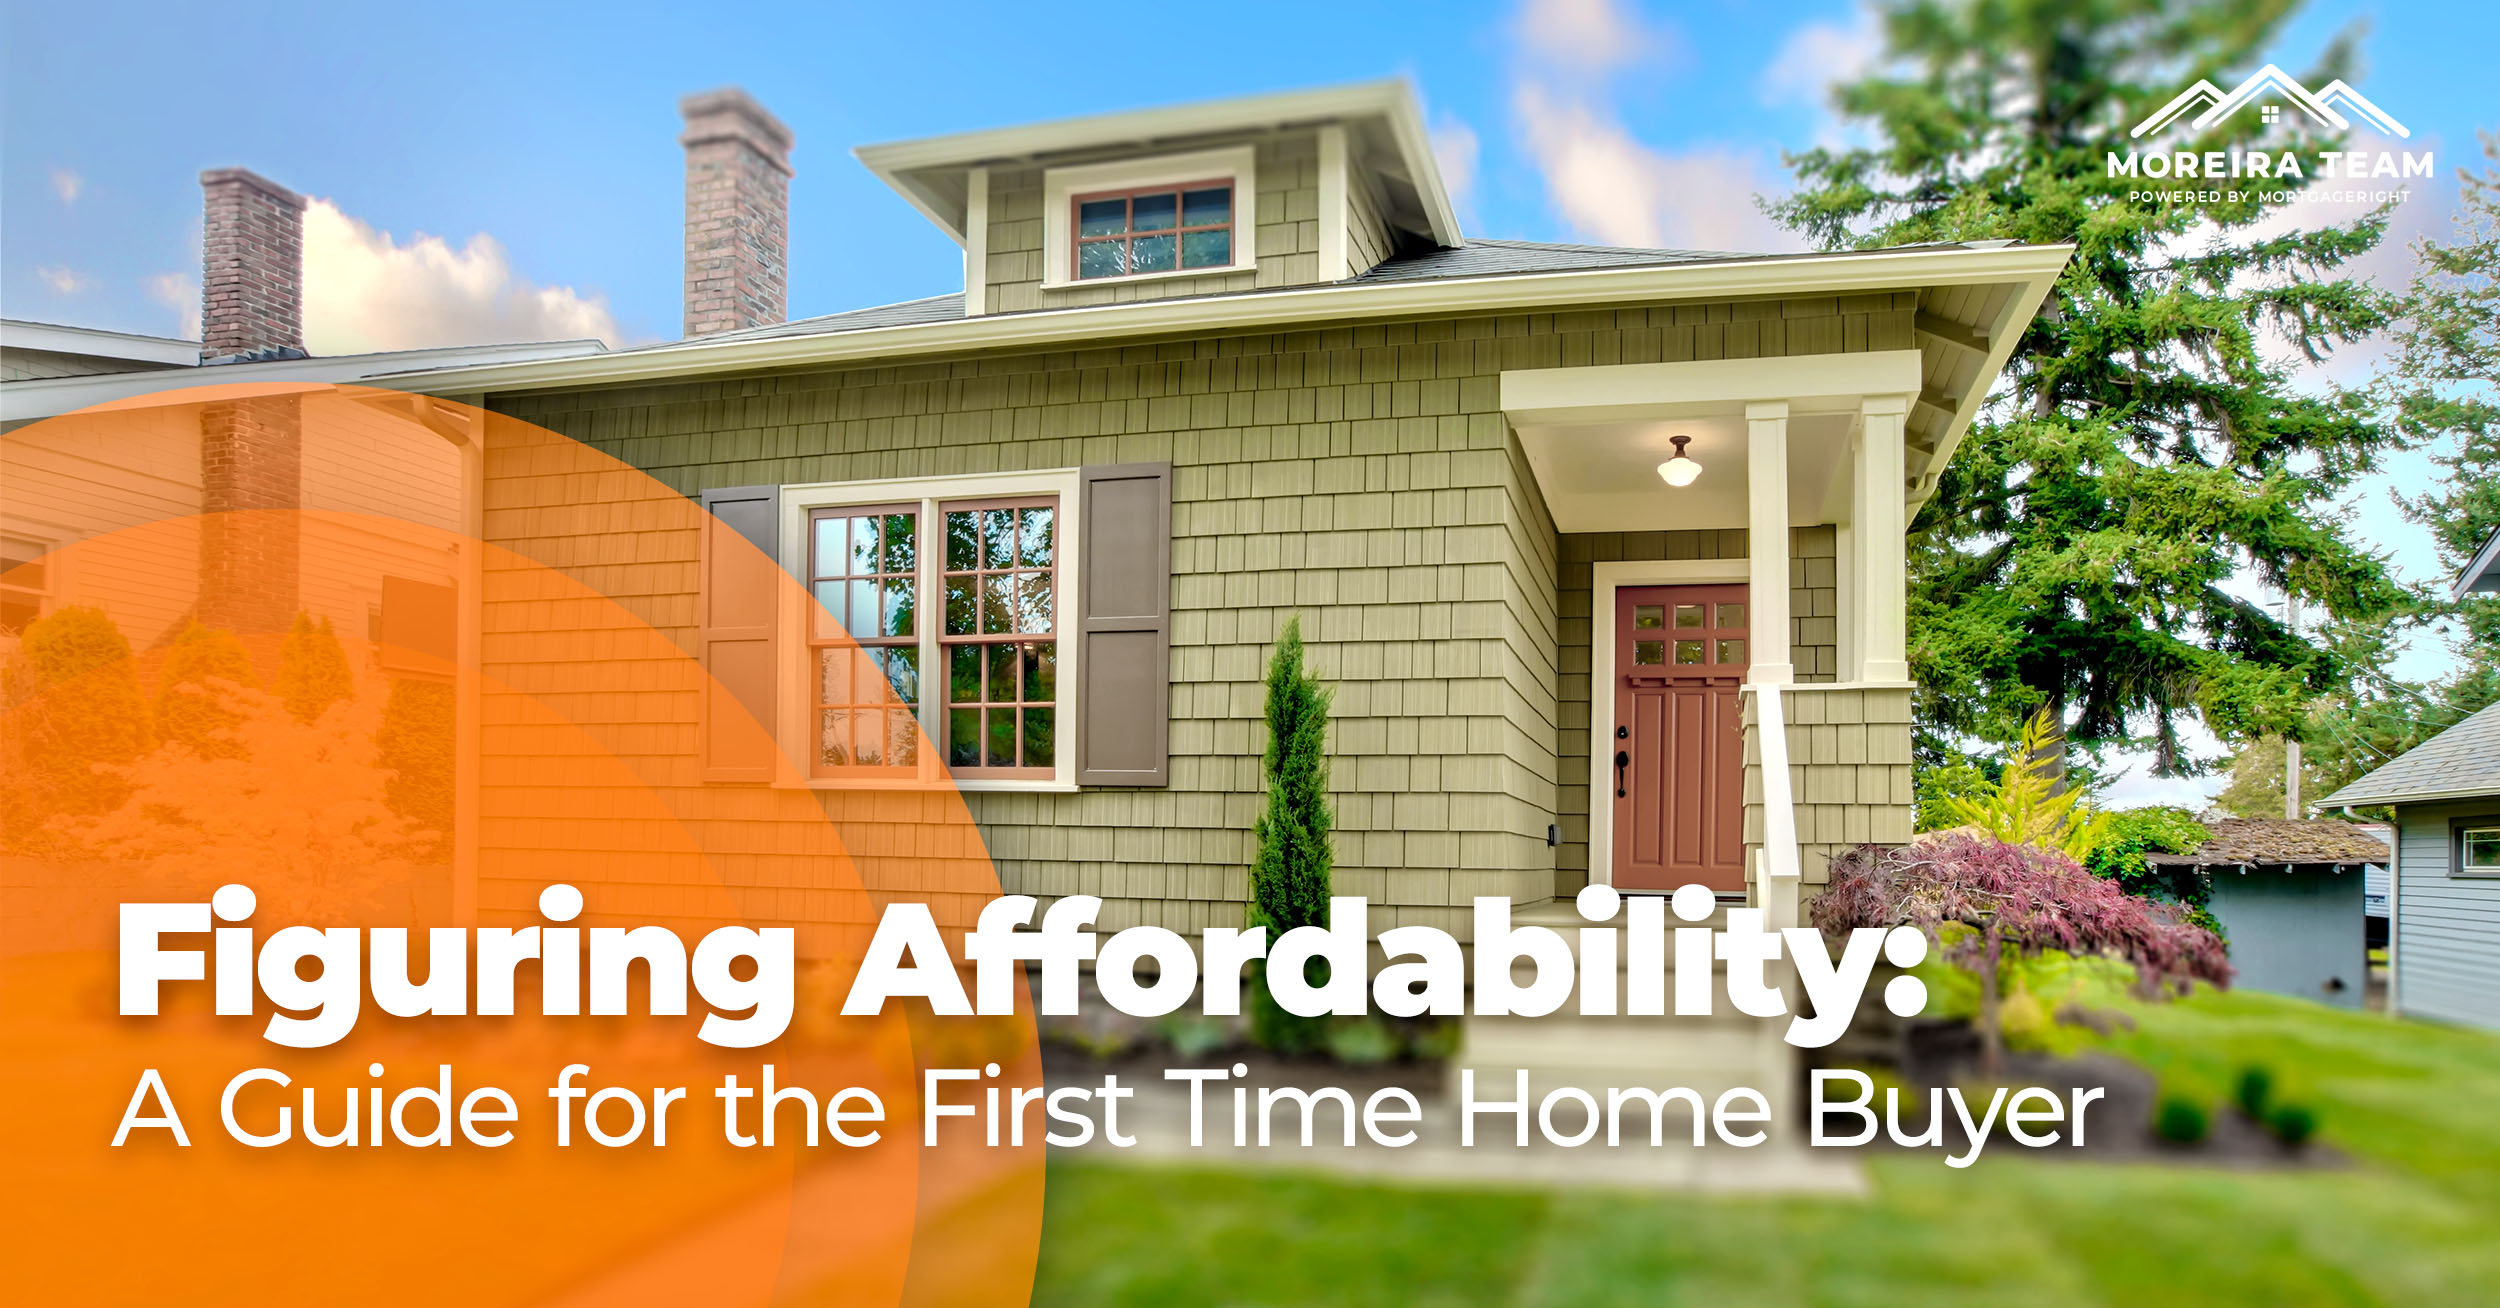 Figuring Affordability: A Guide for the First Time Home Buyer